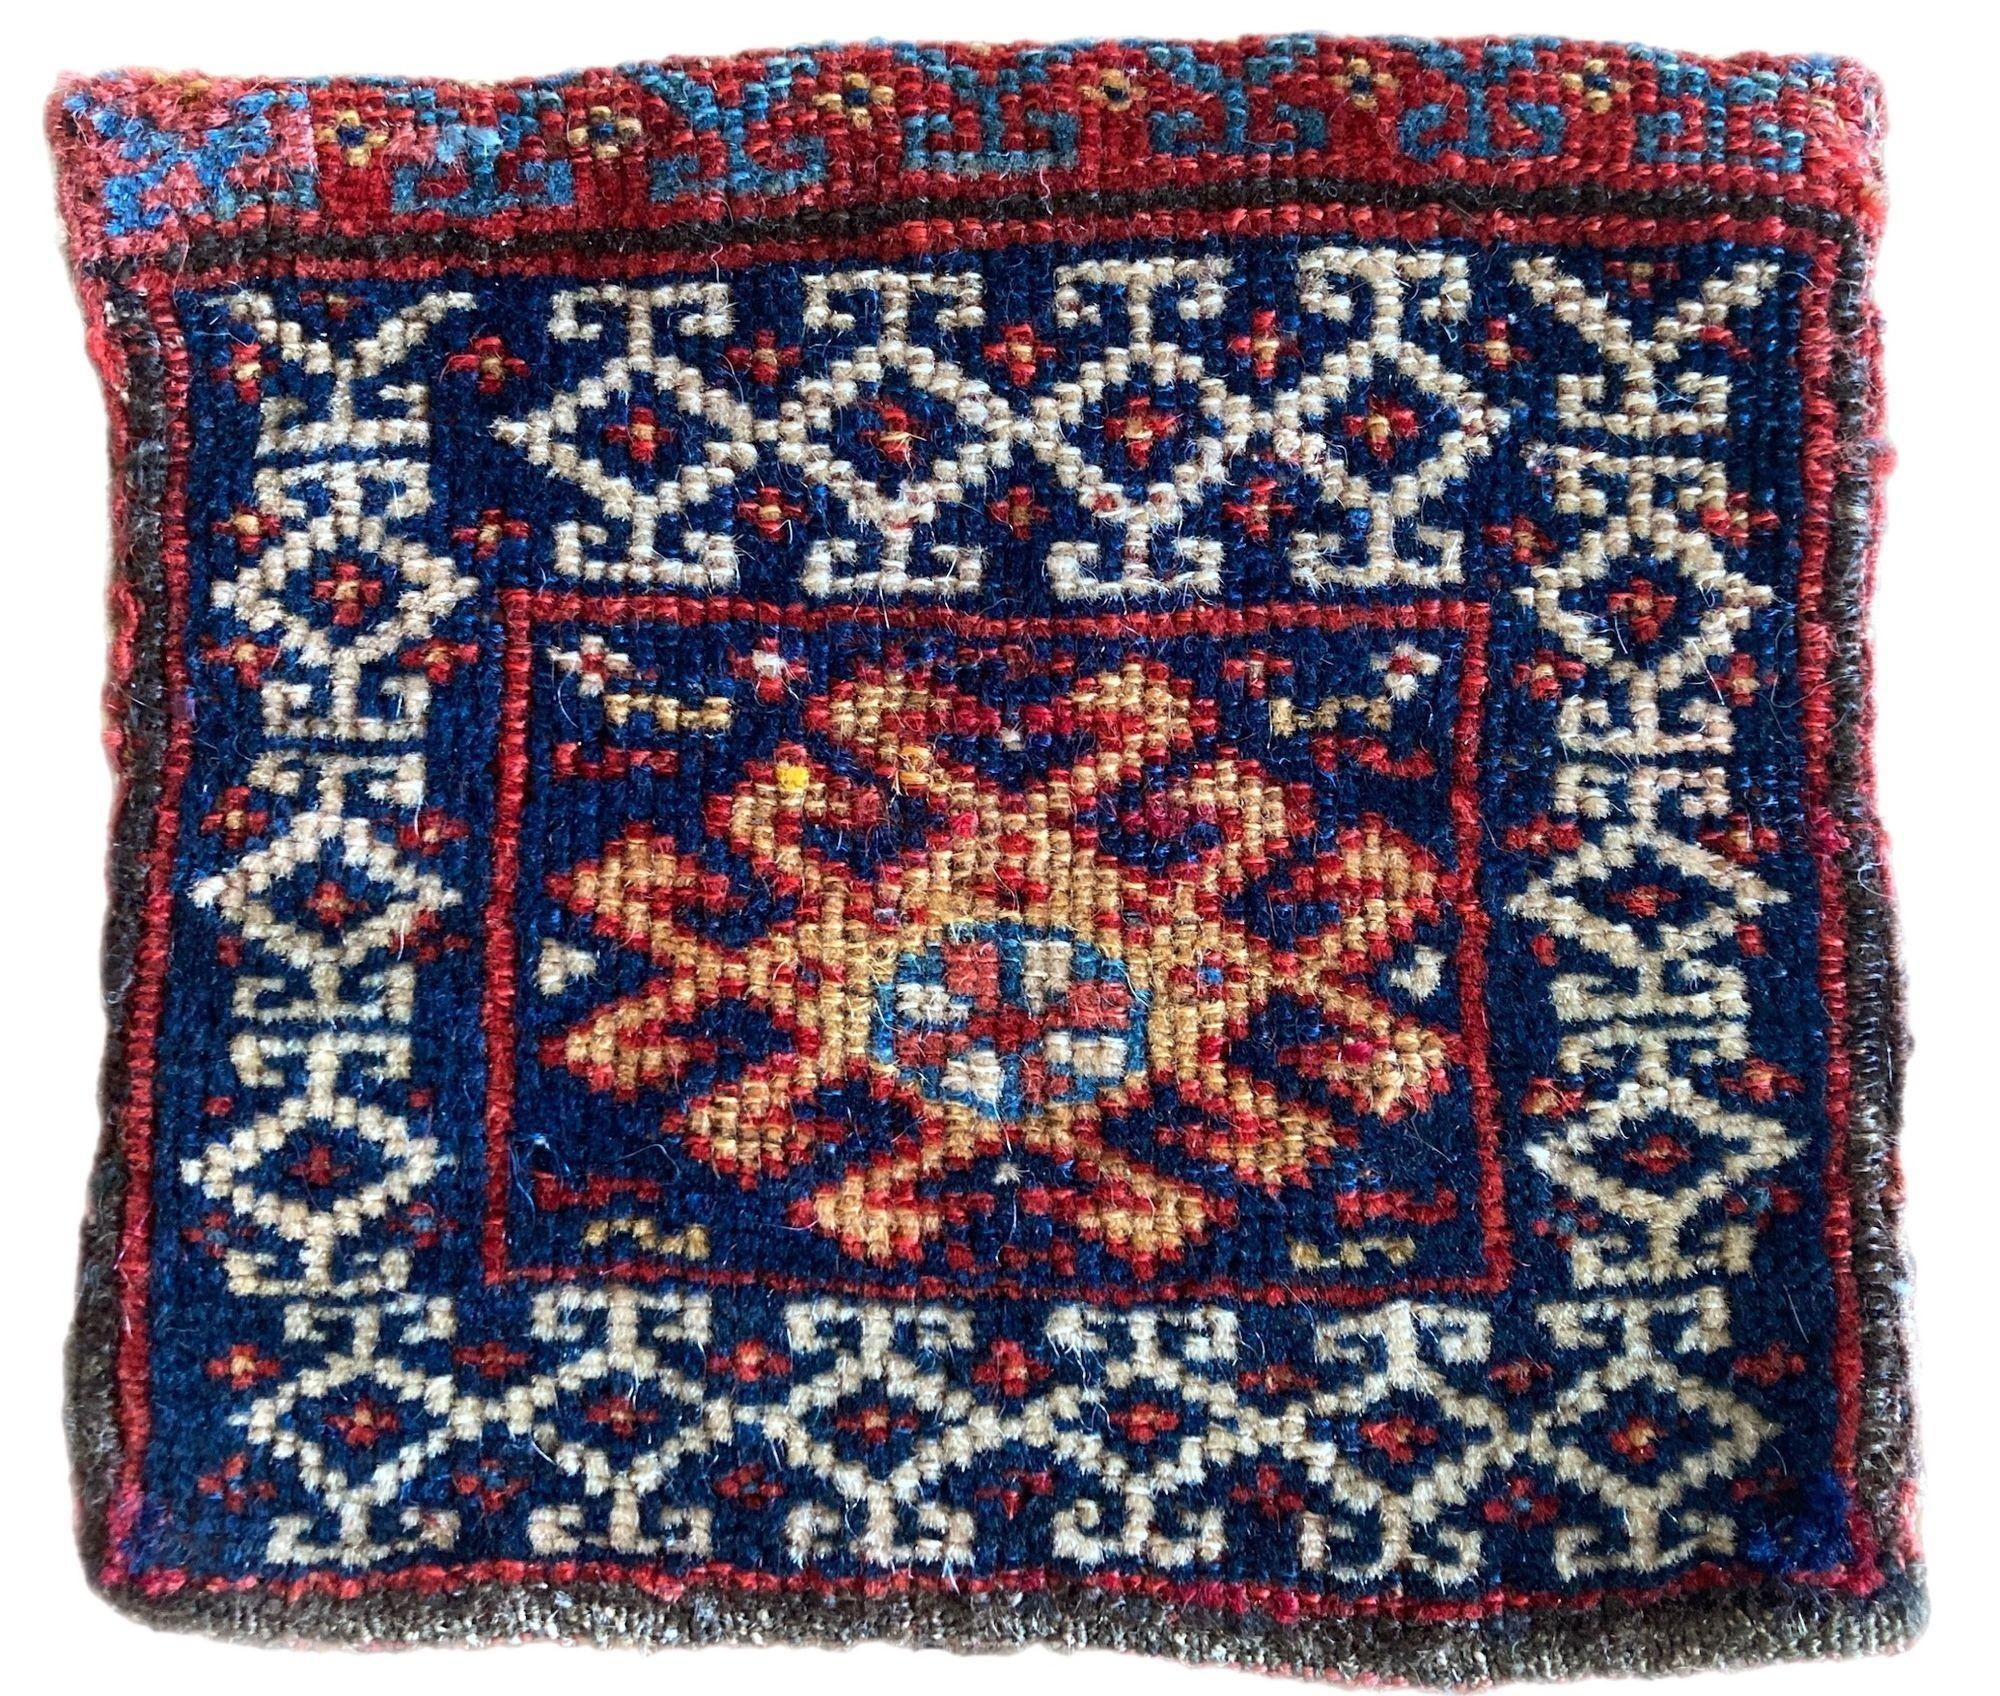 A beautiful antique Chanteh woven by the nomadic Qashqai tribe circa 1880. It is unusually woven on both sides with a red field on one side and a dark indigo on the other. These small vanity bags were woven by the women of the tribe and would have